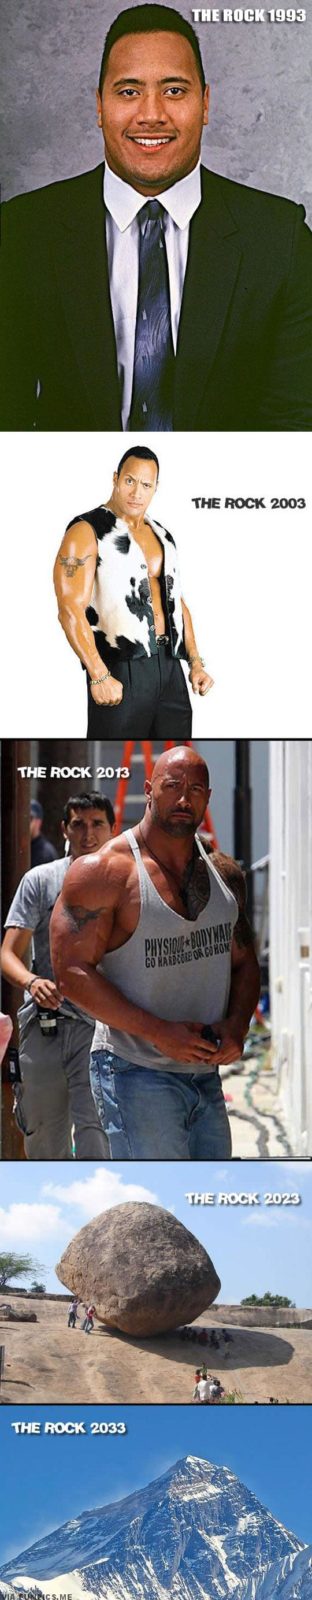 Evolution of The Rock